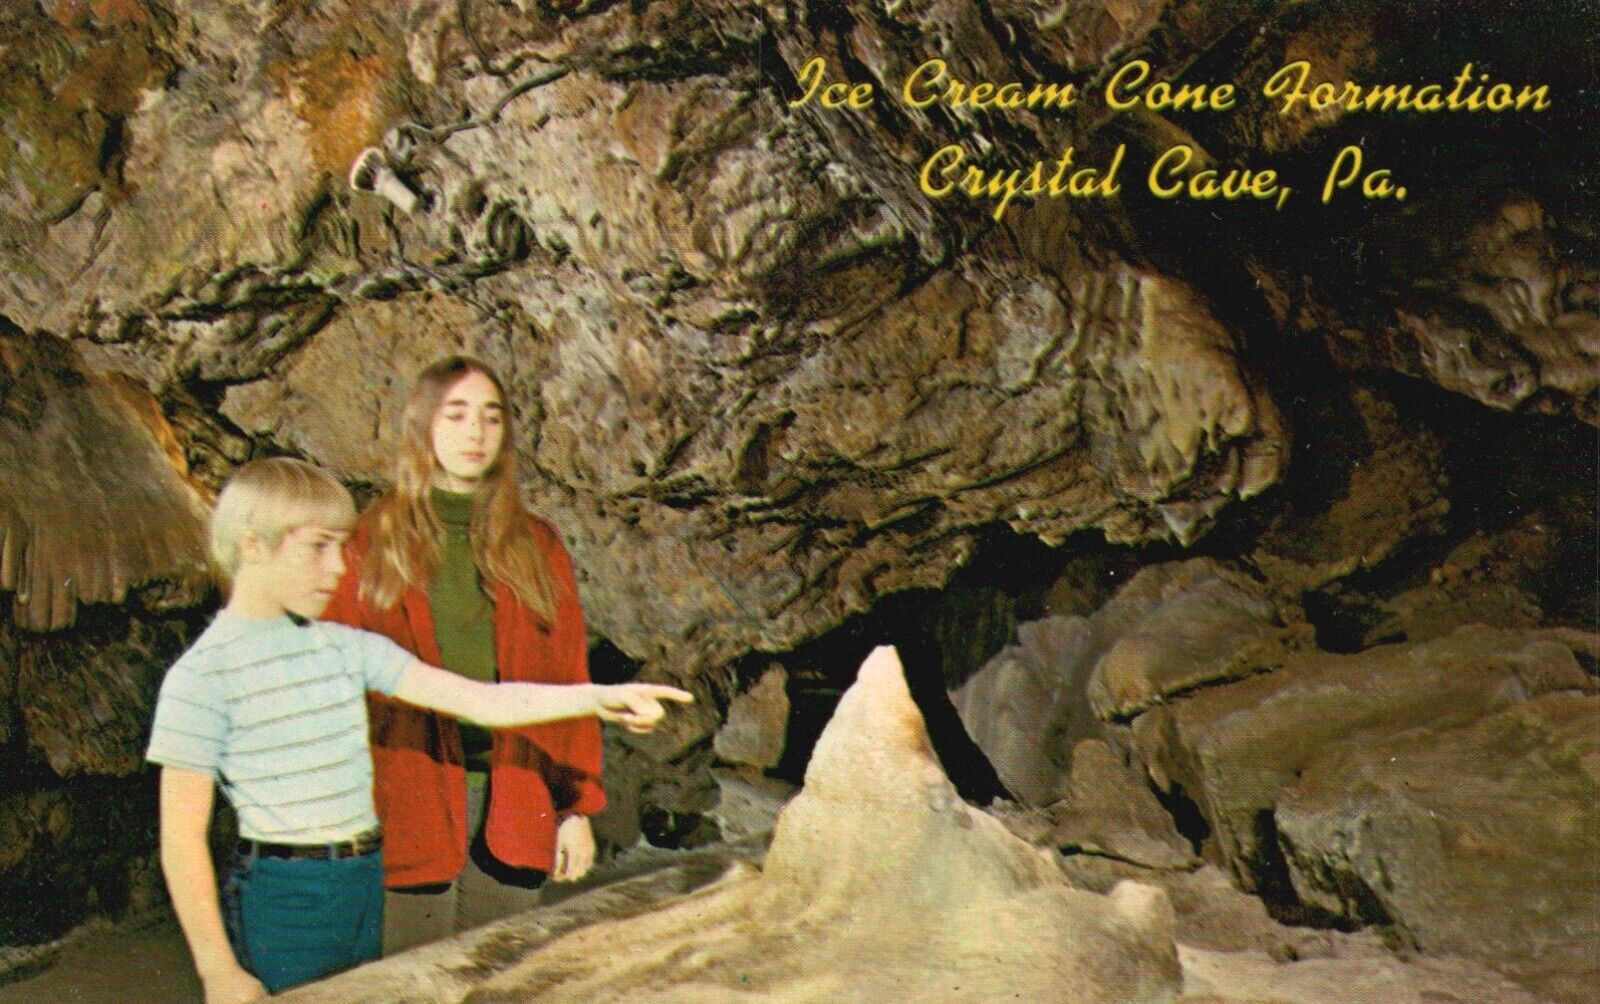 Postcard PA Crystal Cave Ice Cream Cone Formation Unposted Vintage PC J2229